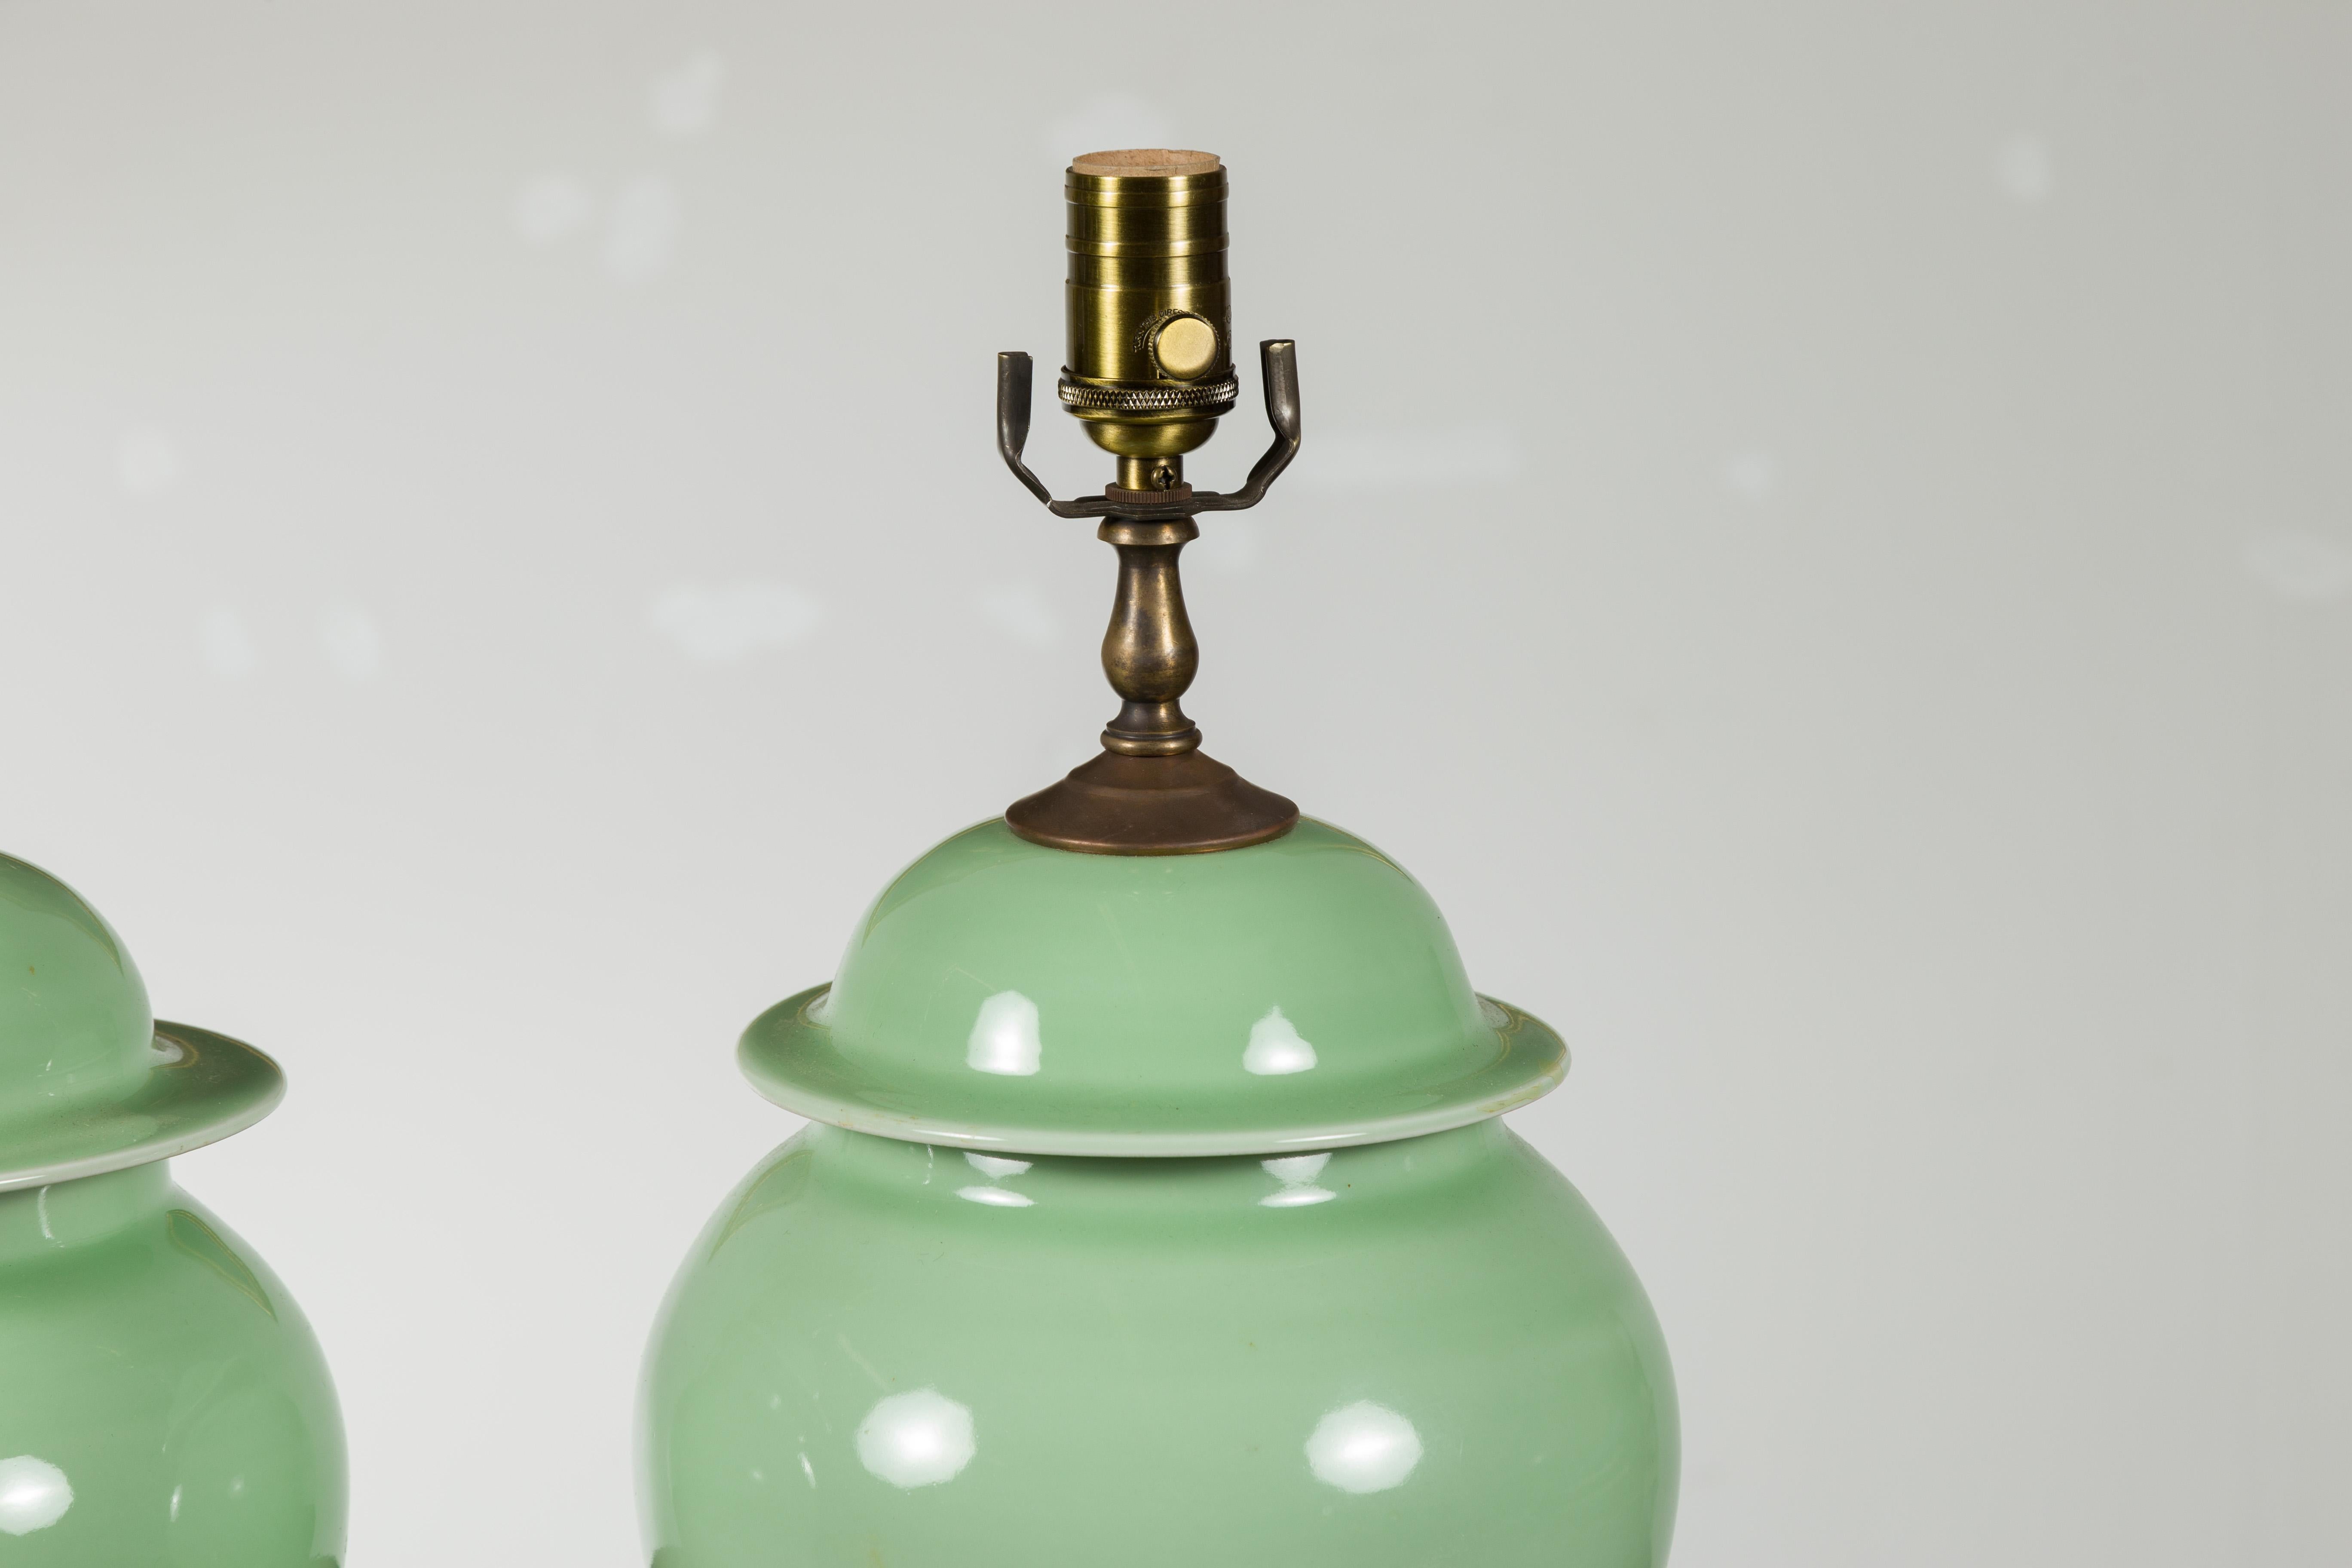 Pair of Green Porcelain Lidded Jar Table Lamps with Round Lucite Bases, Wired For Sale 4